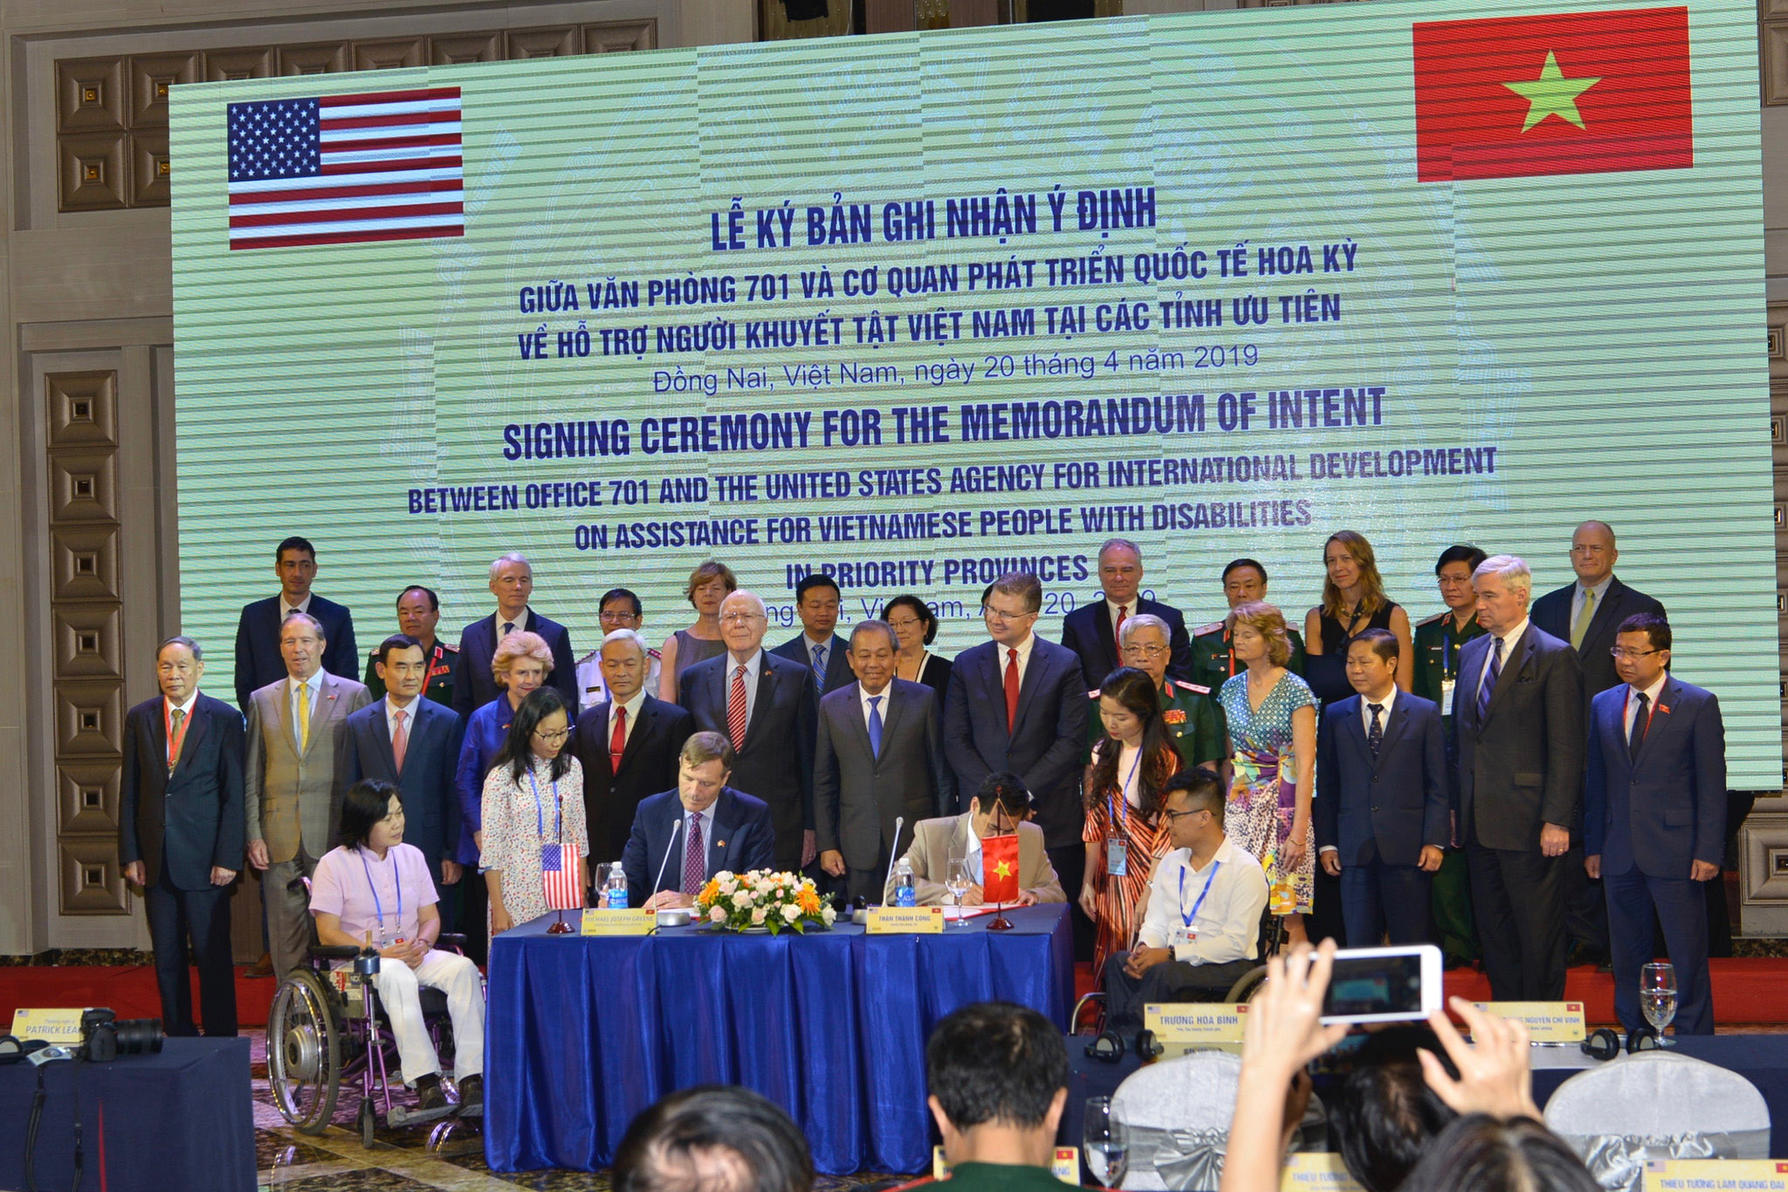 Signing of the Memorandum of Intent for New Partnership on Disabilities Assistance Bien Hoa City, April 20, 2019. (Nguyen Thac Phuong/USAID)